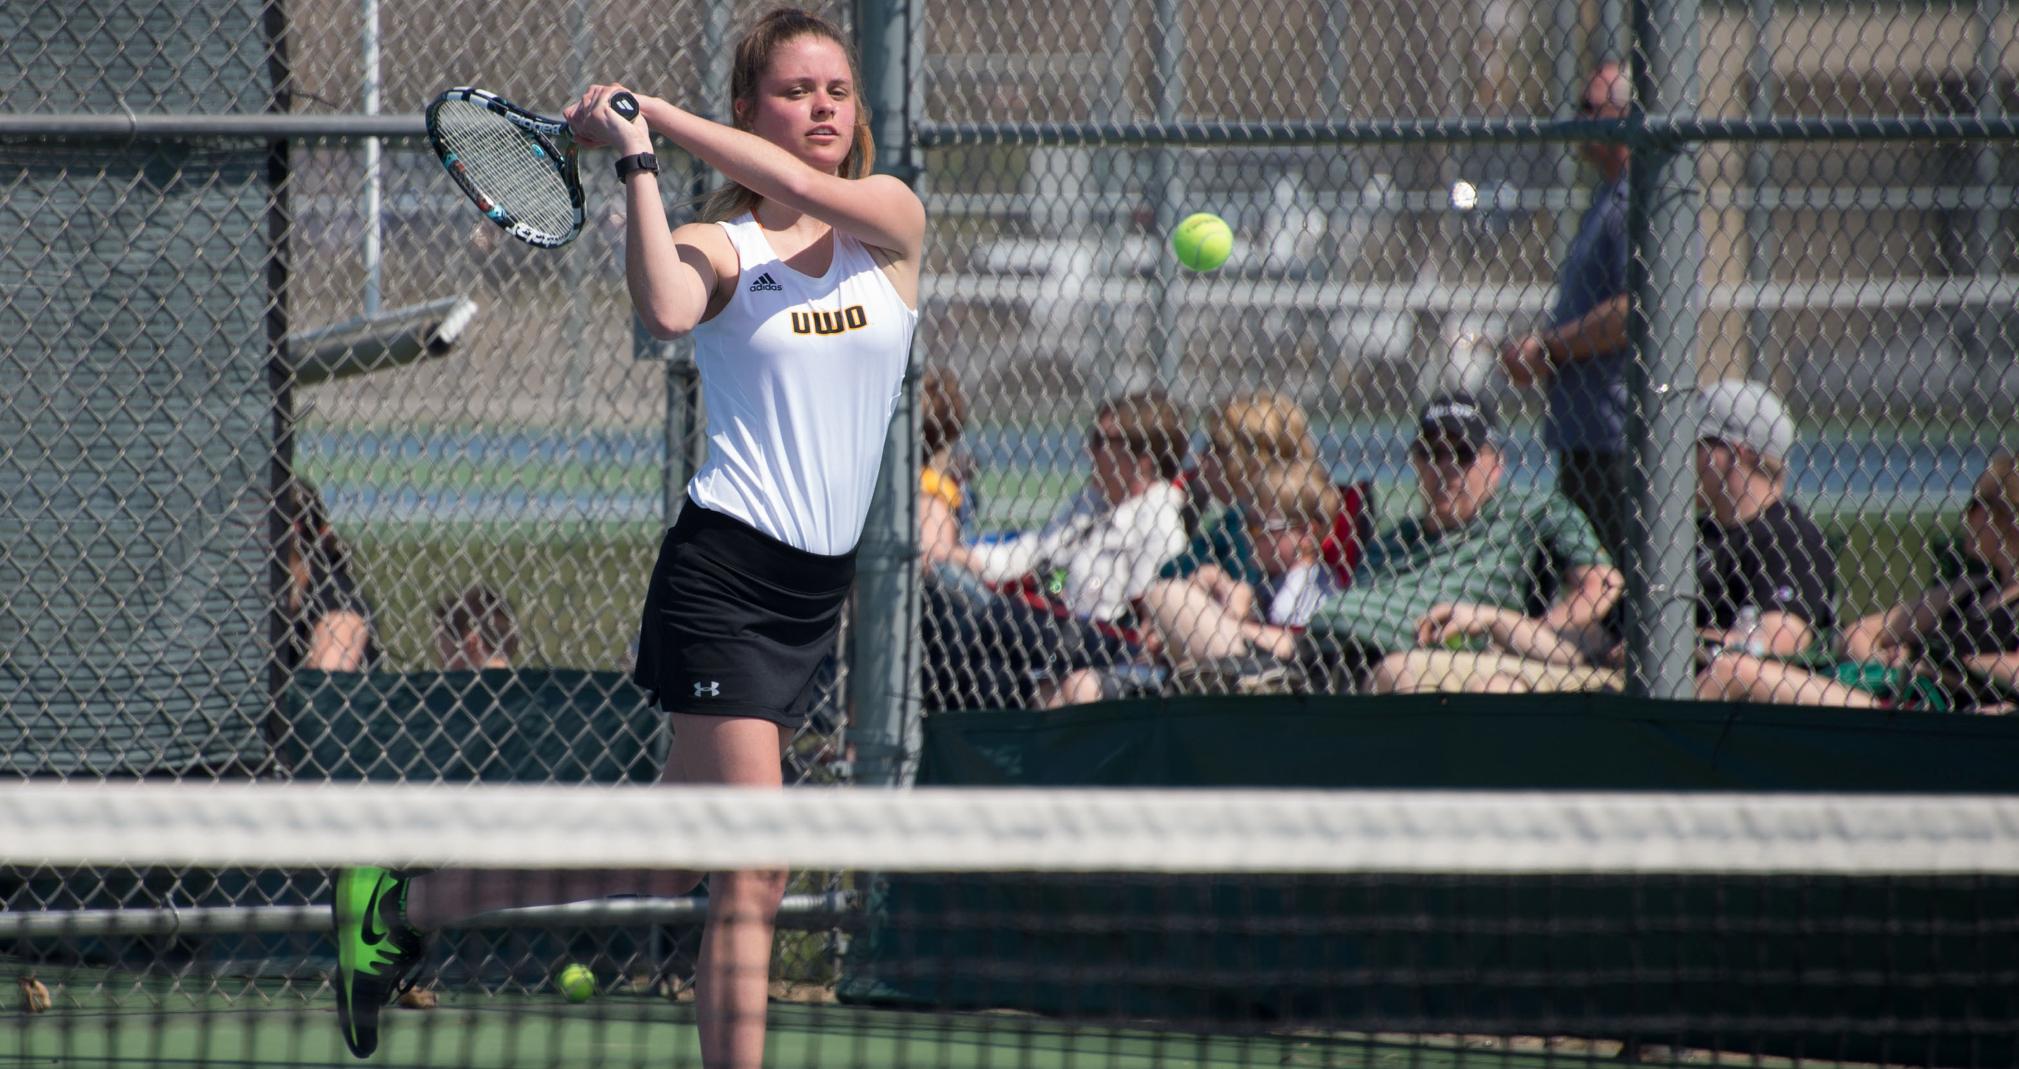 Ashlee Polena teamed with Monica Micoliczyk to place sixth at No. 3 doubles.